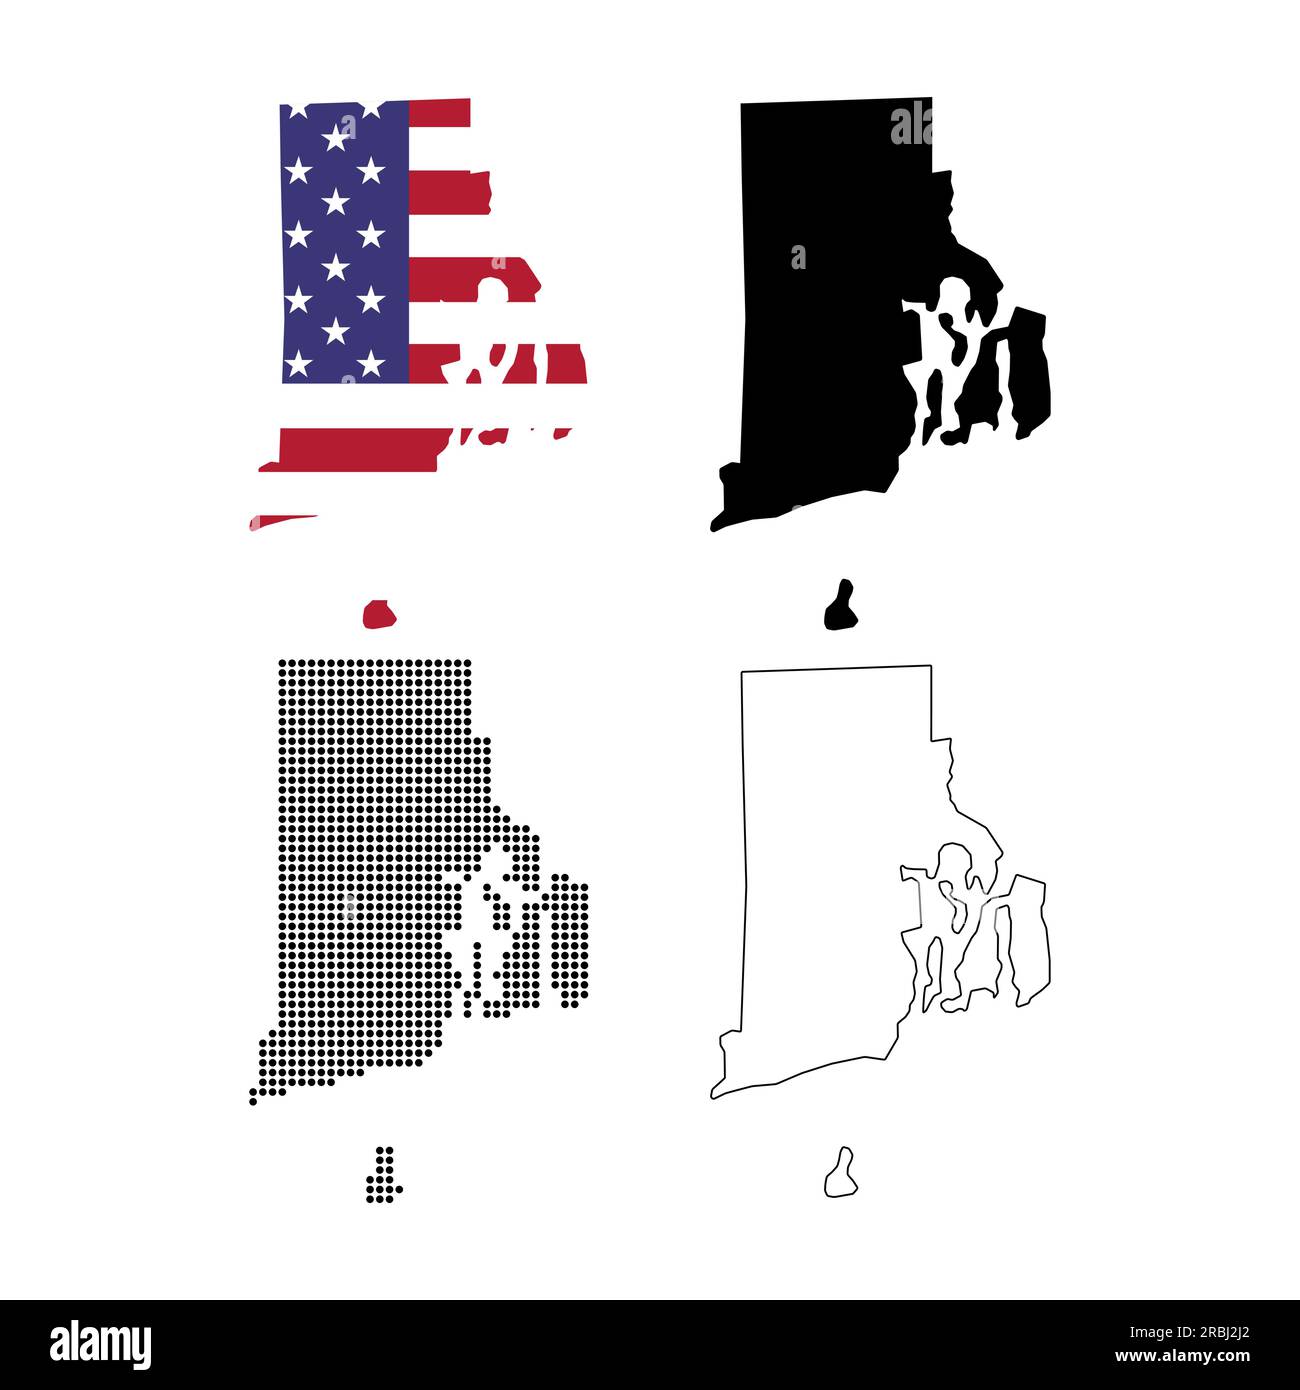 Set of Rhode island map, united states of america. Flat concept symbol vector illustration . Stock Vector